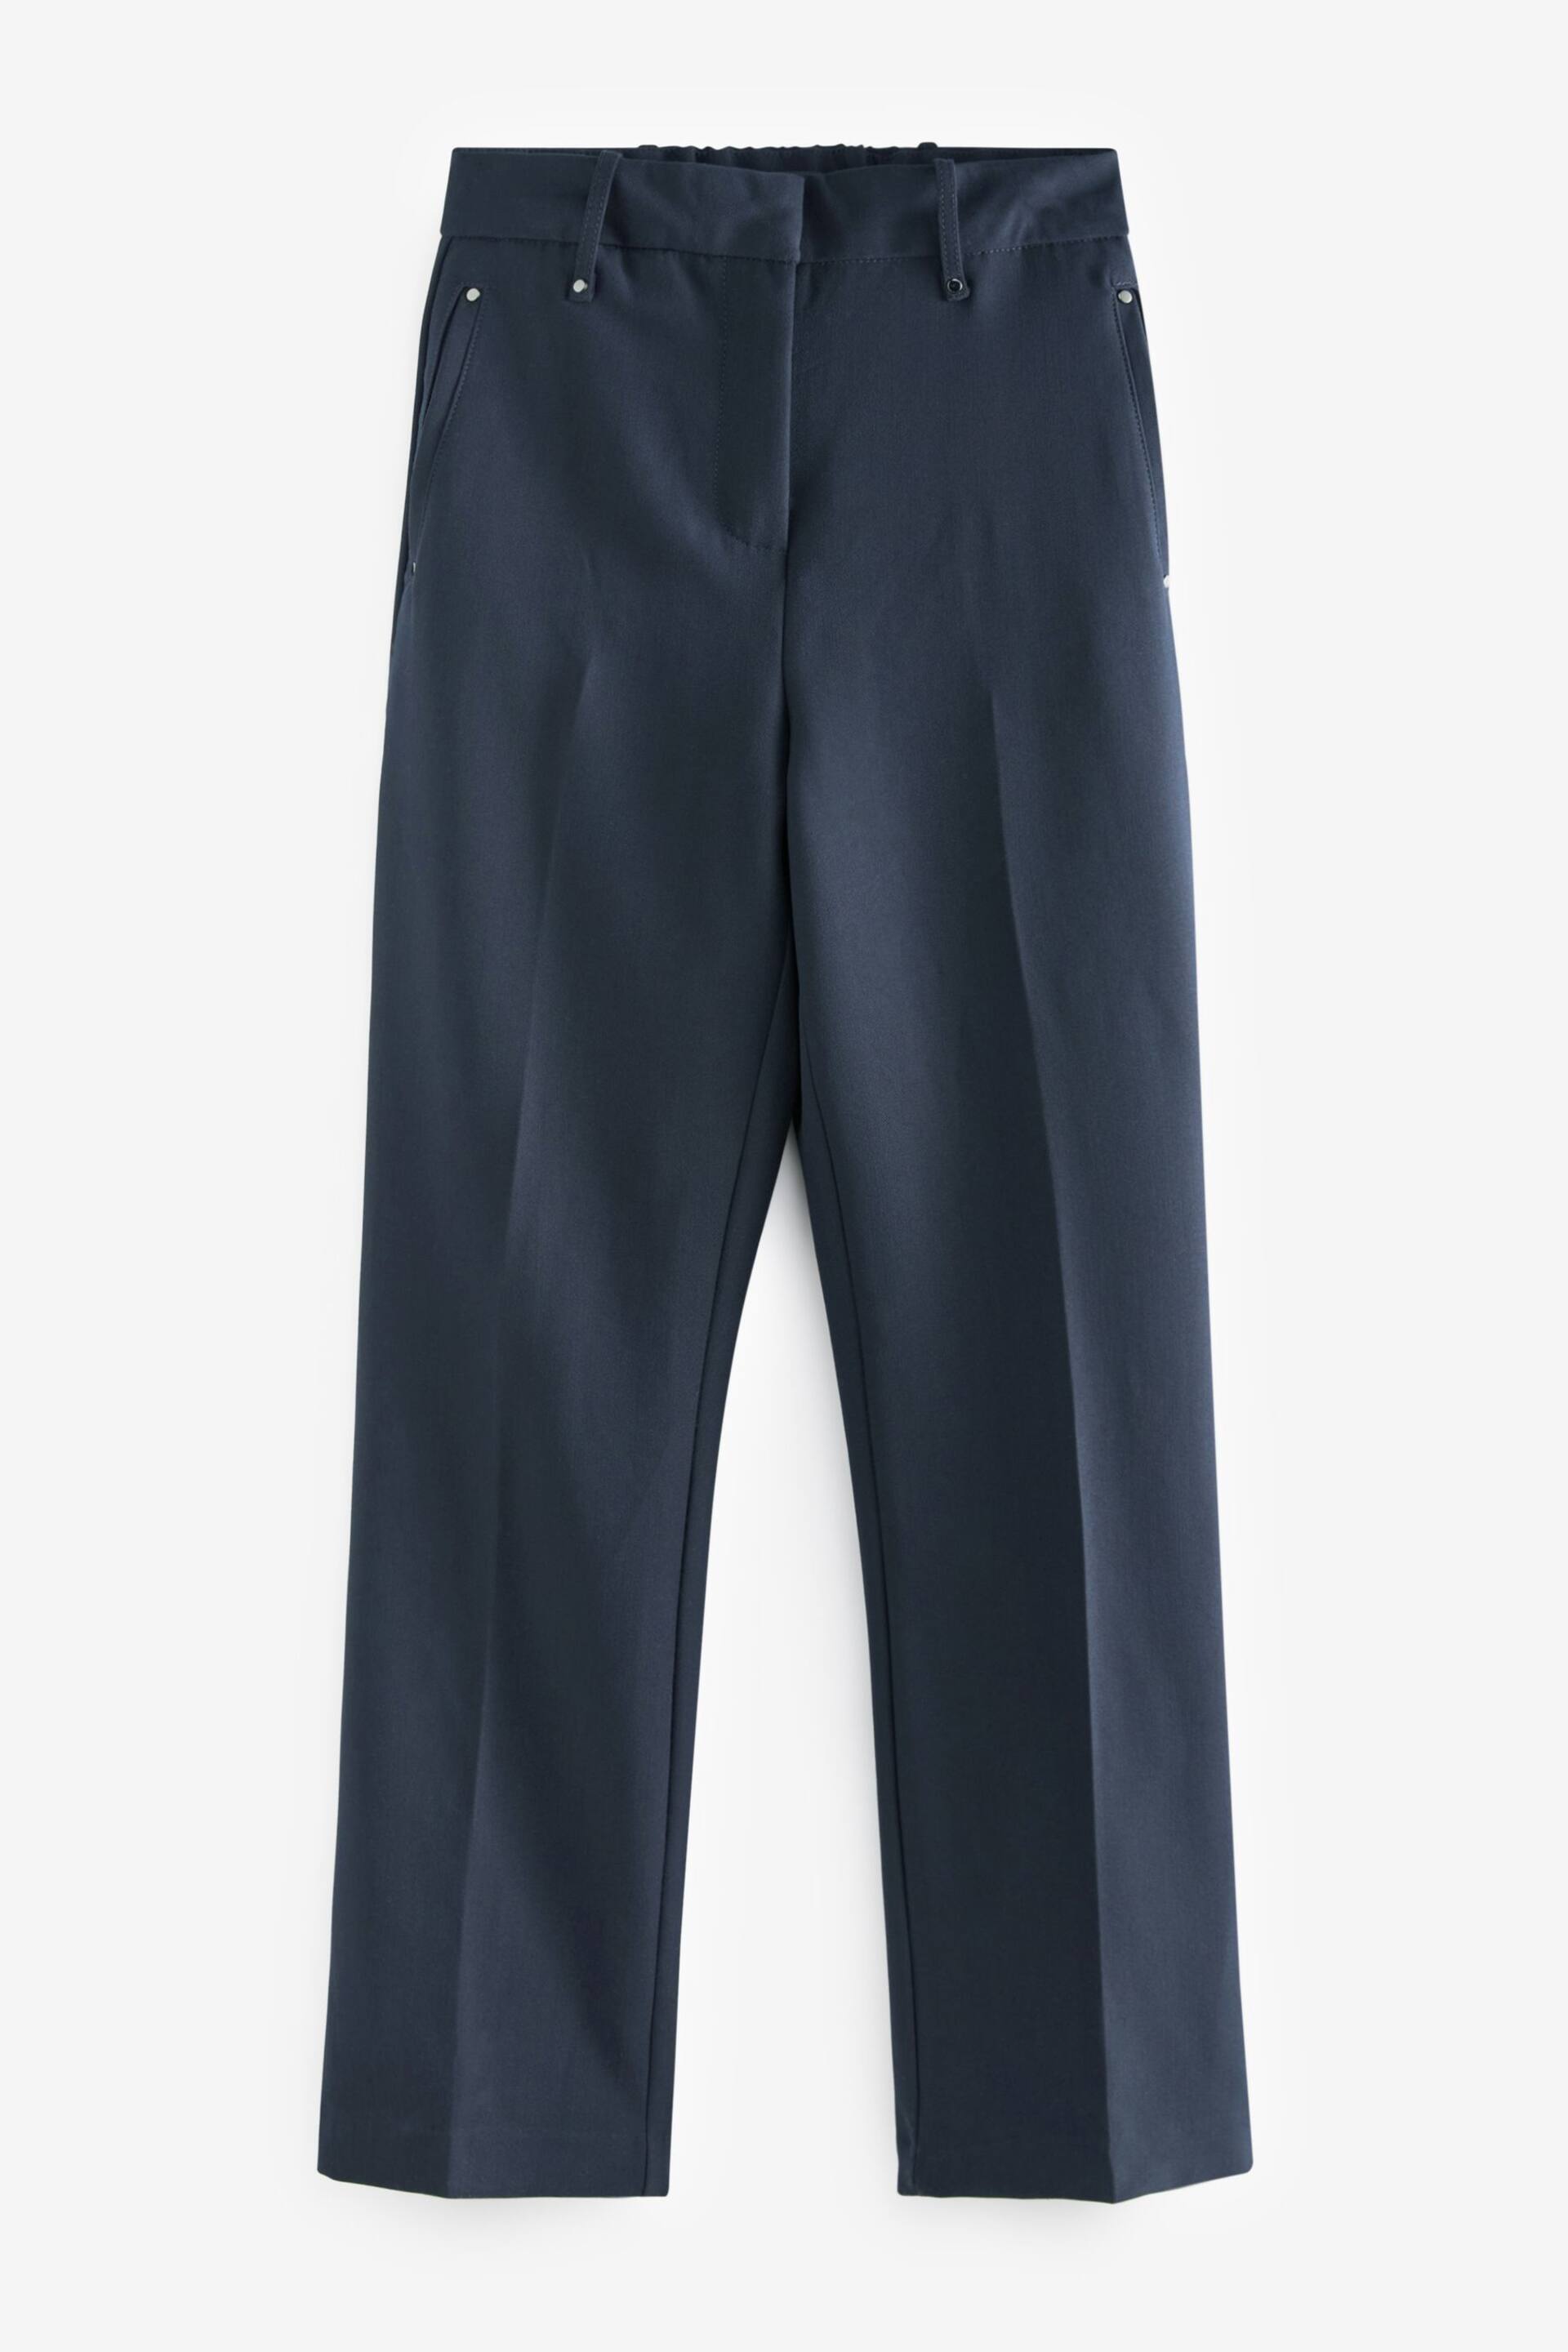 Navy Blue Tailored Elasticated Back Boot Cut Trousers - Image 5 of 5